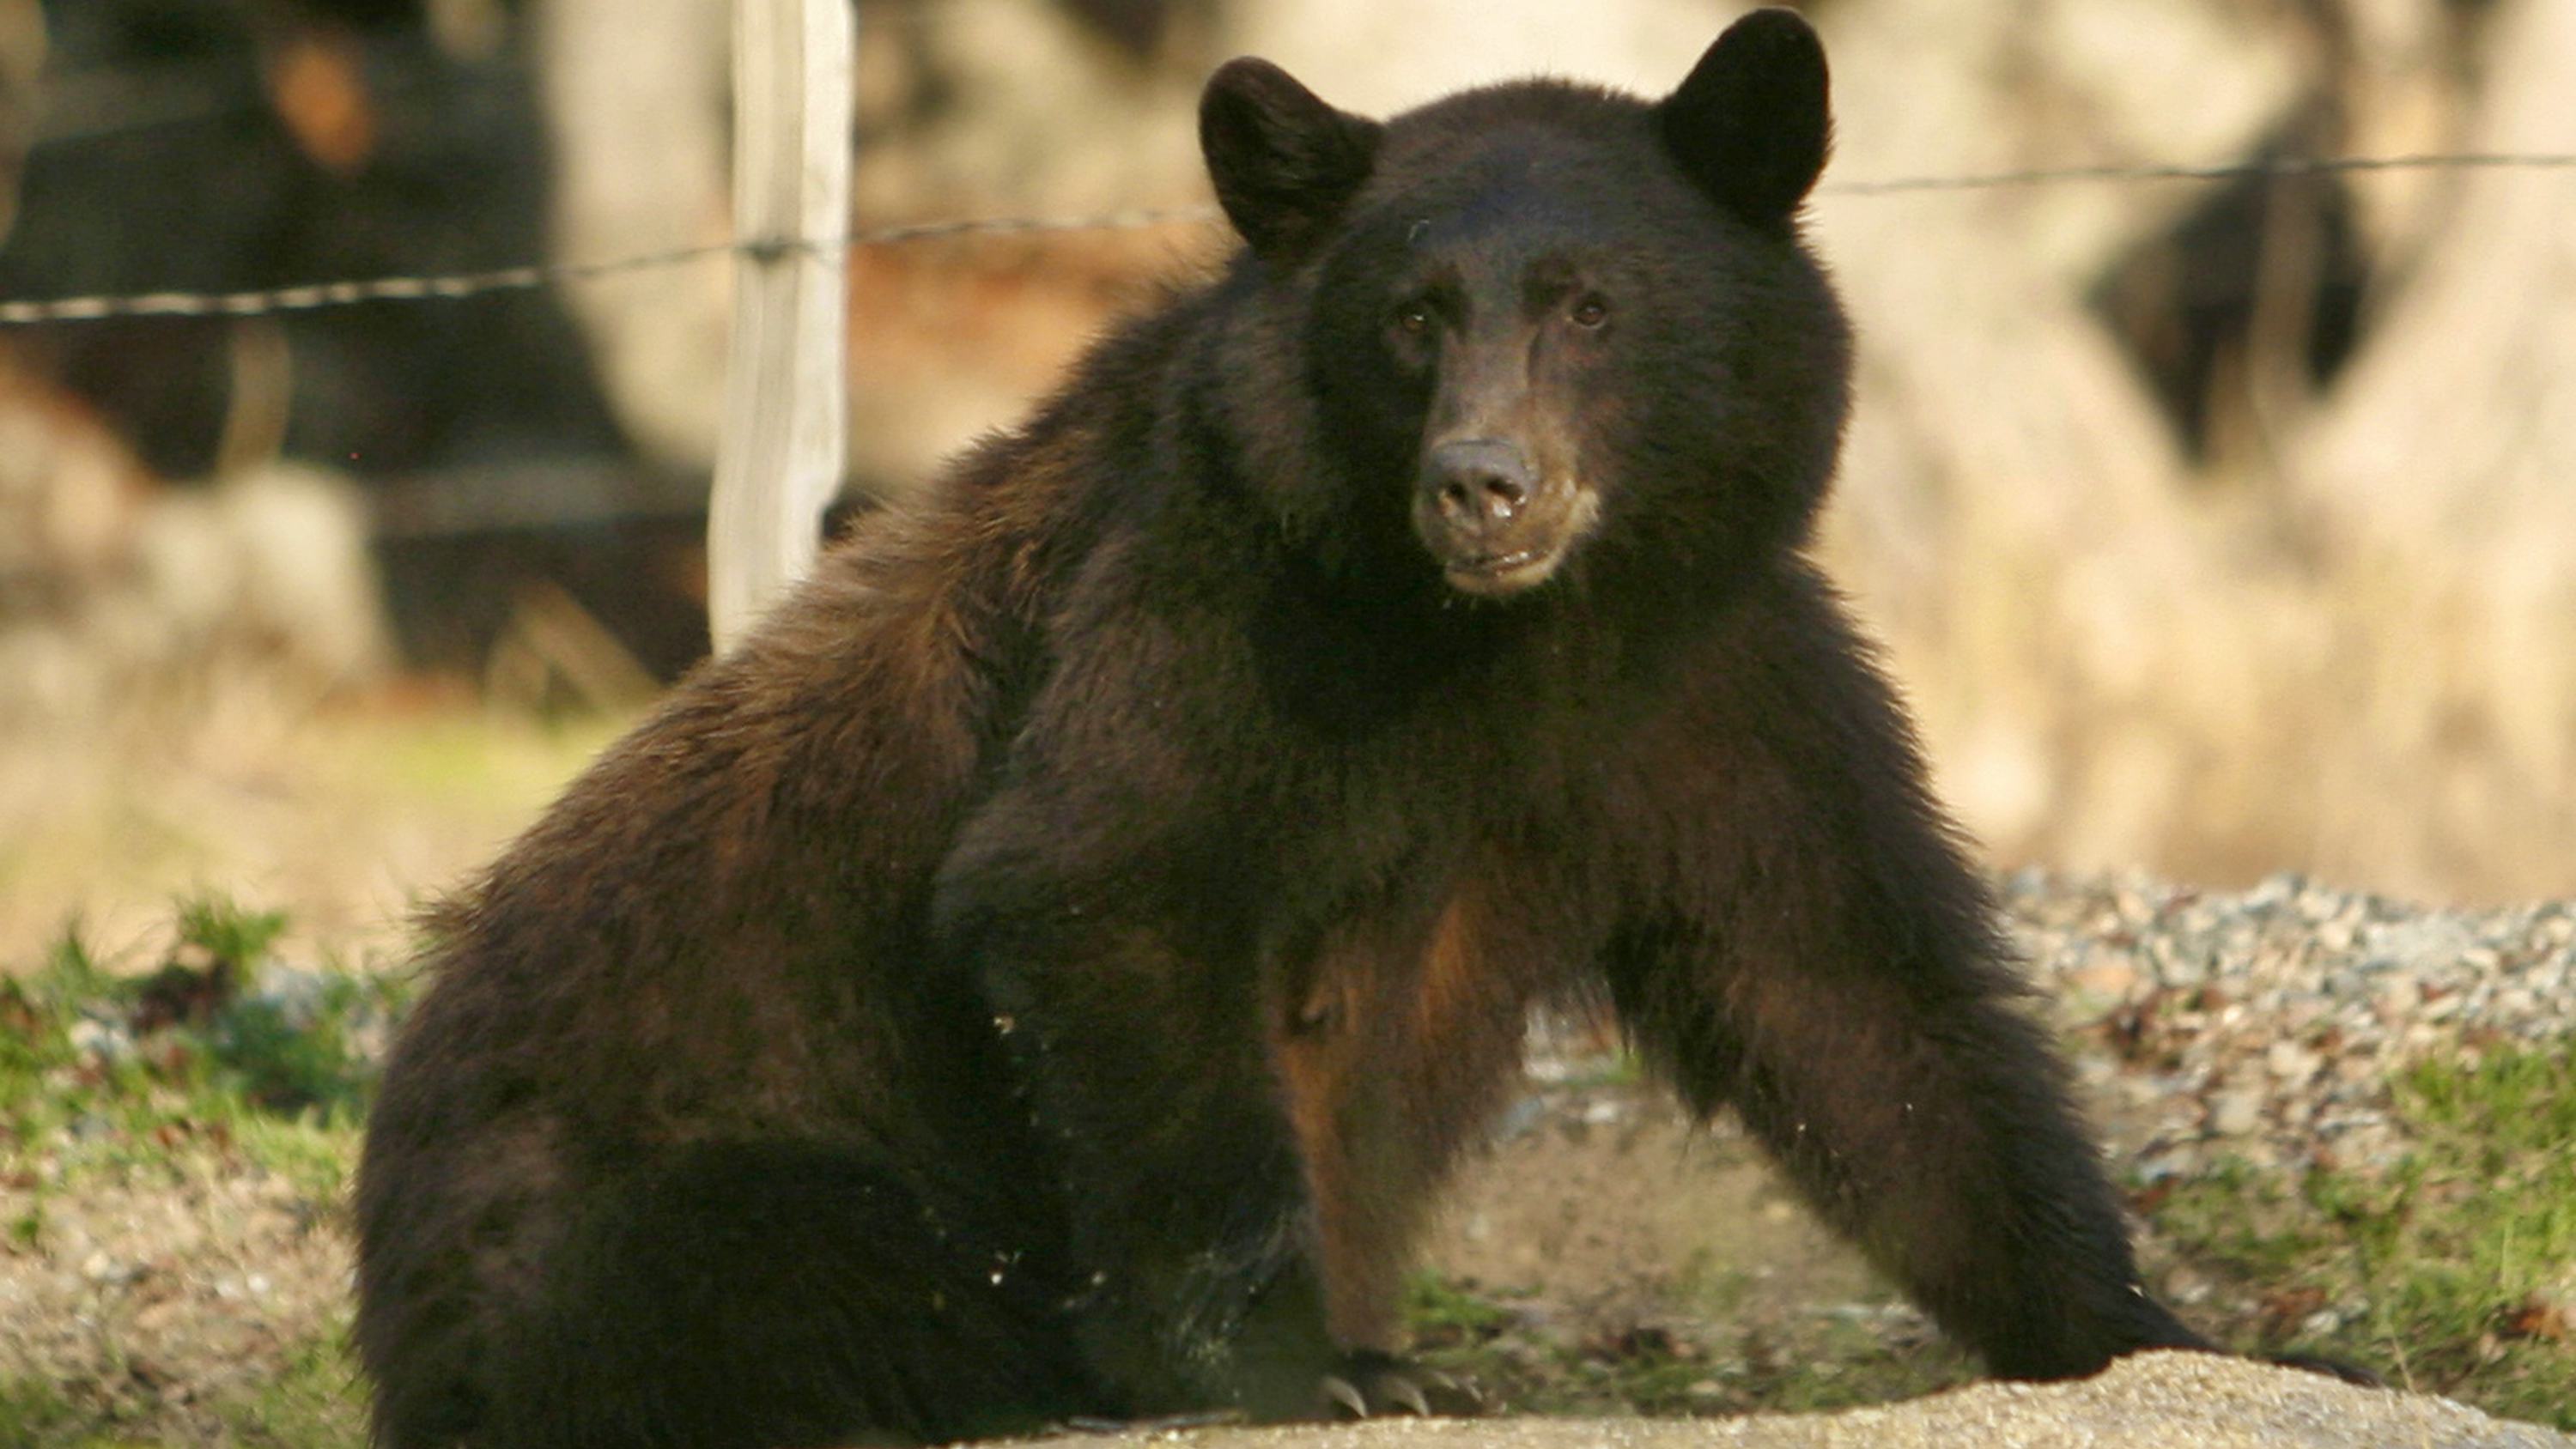 Newsela - Hungry bears look for food in town